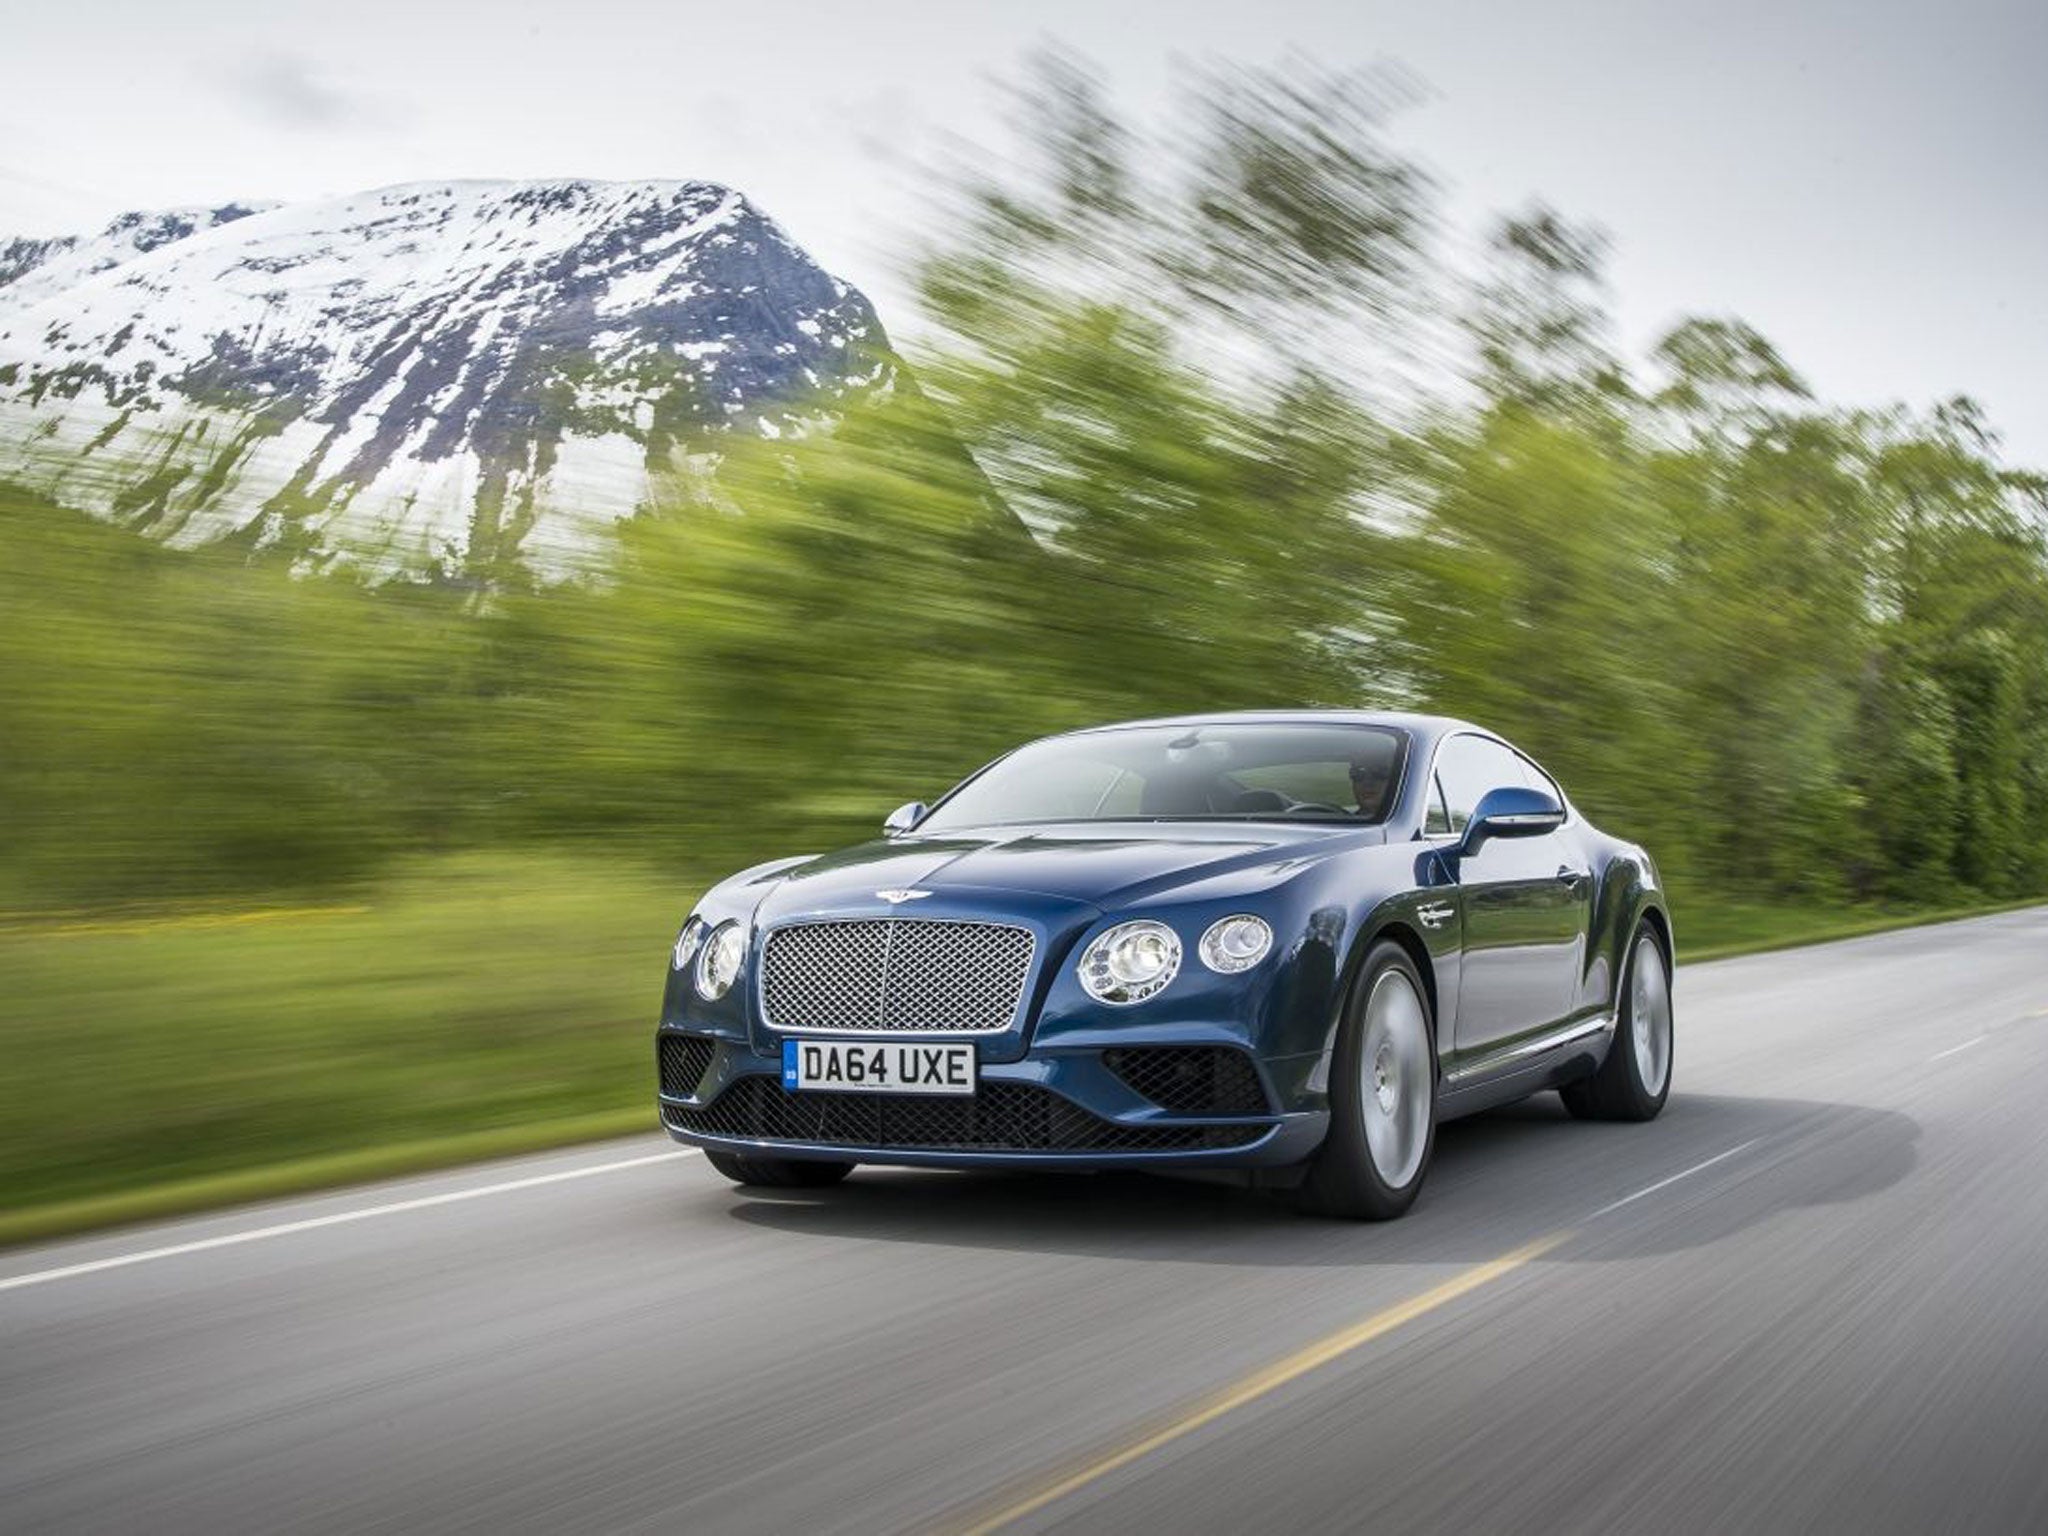 Make a £1 donation and you will enter a draw, with the Bentley Continental GT as the big prize